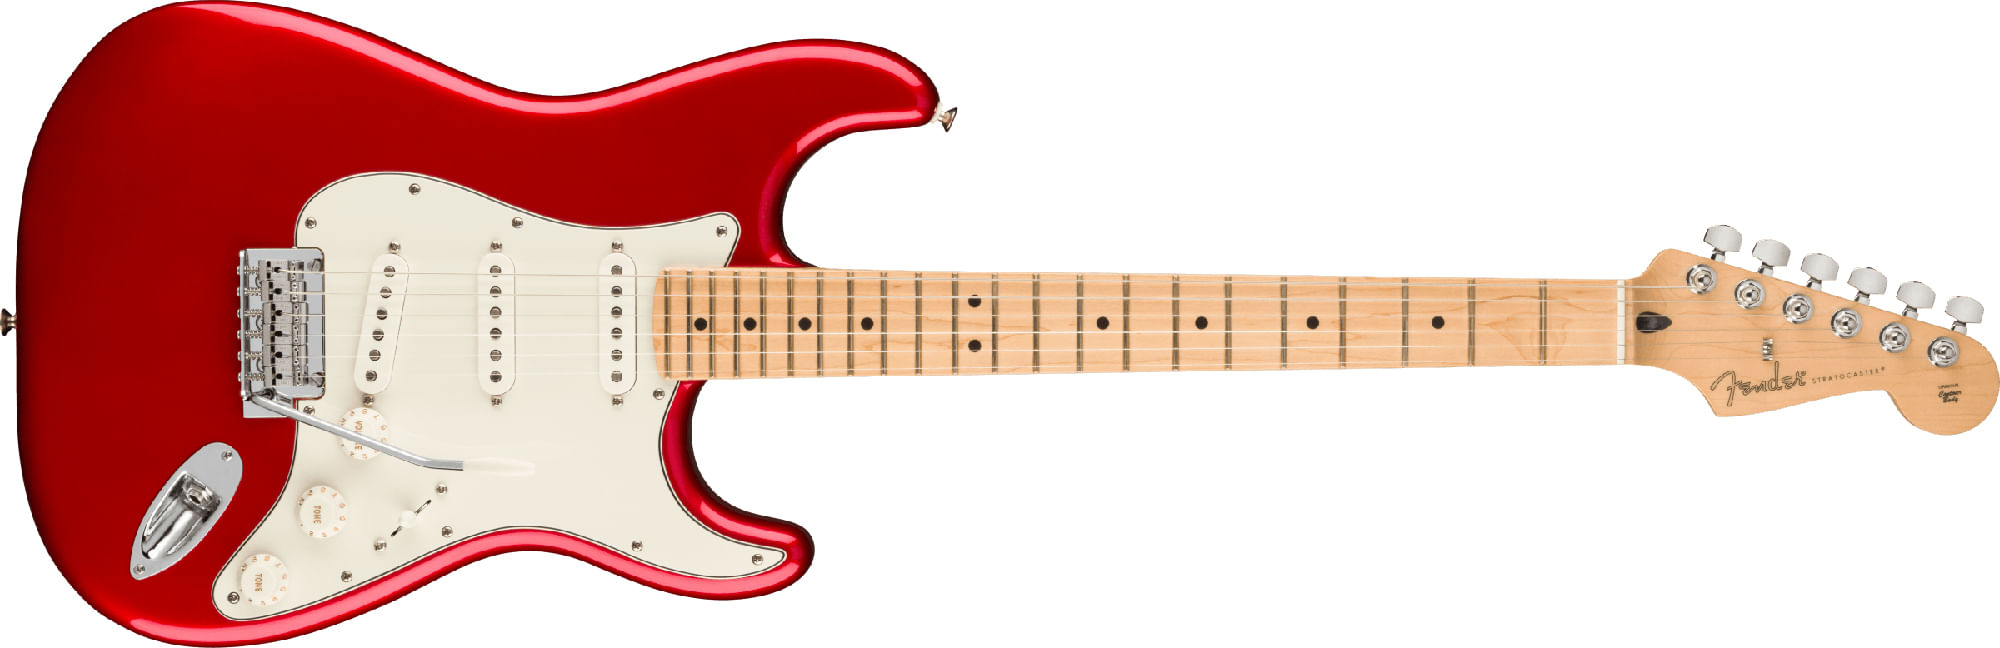 Fender Payer Stratocaster - Maple, Candy Apple Red